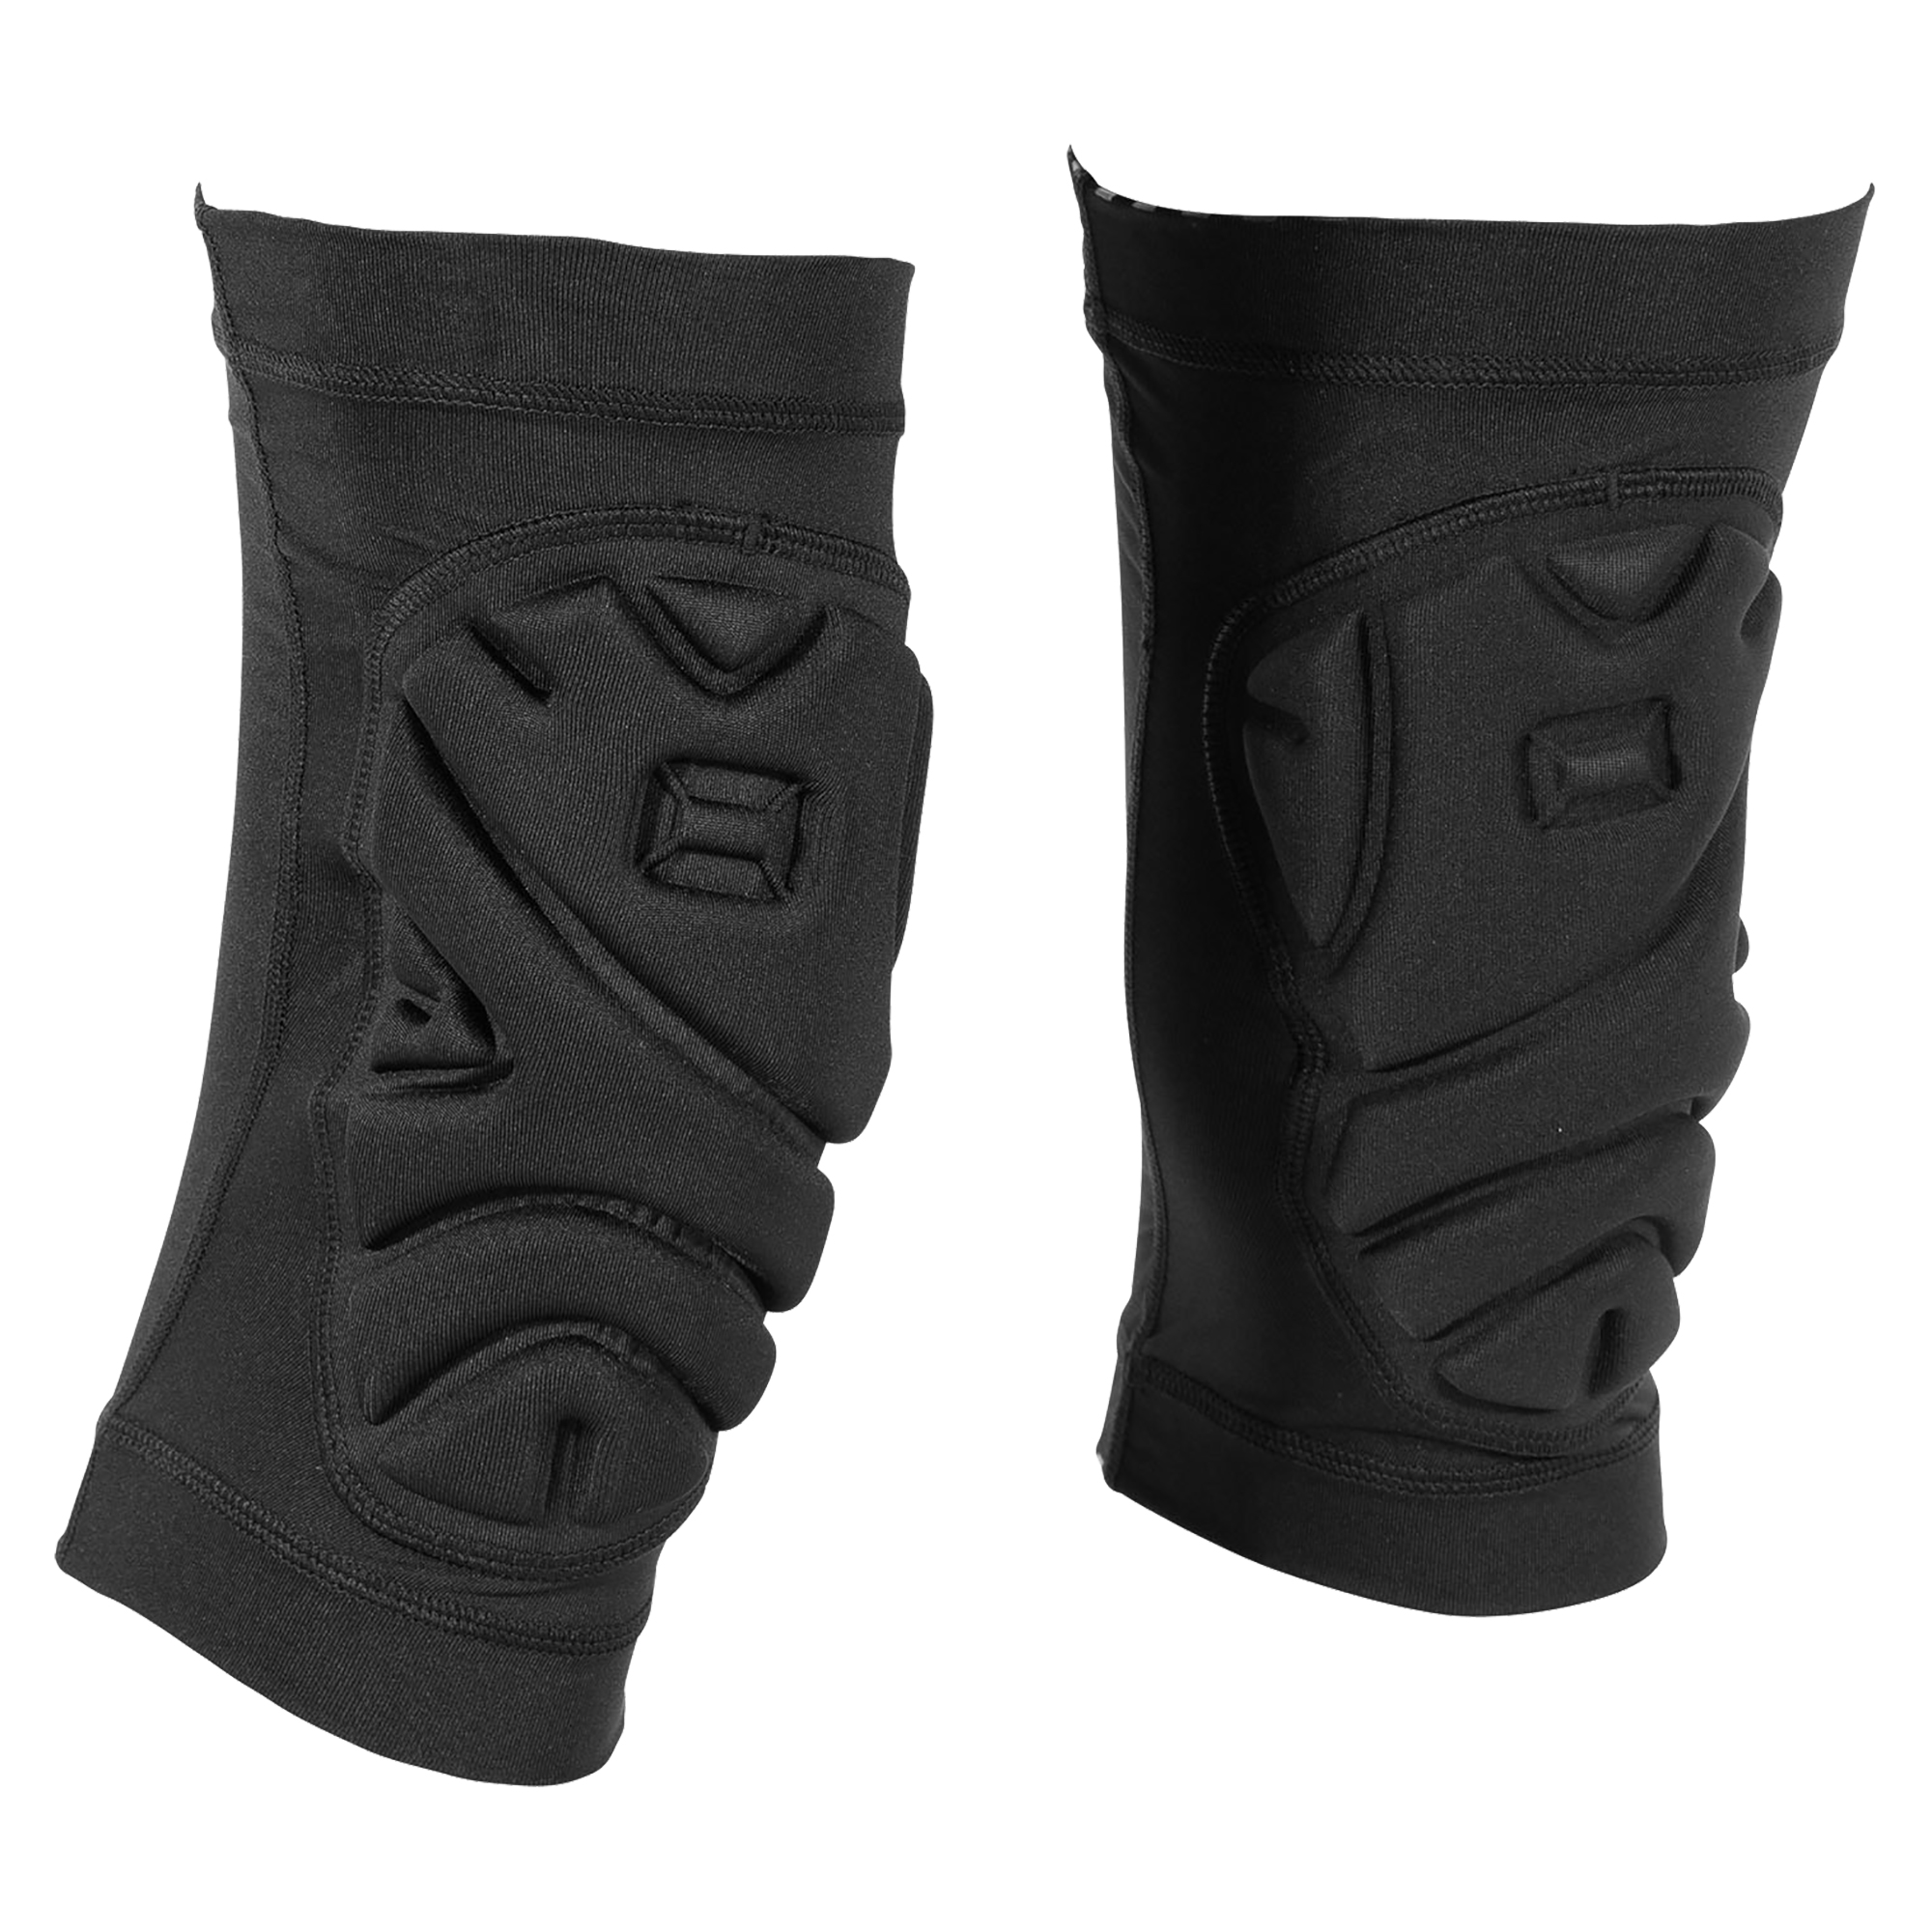 Stanno Equip Protection Pro Knee Sleeve